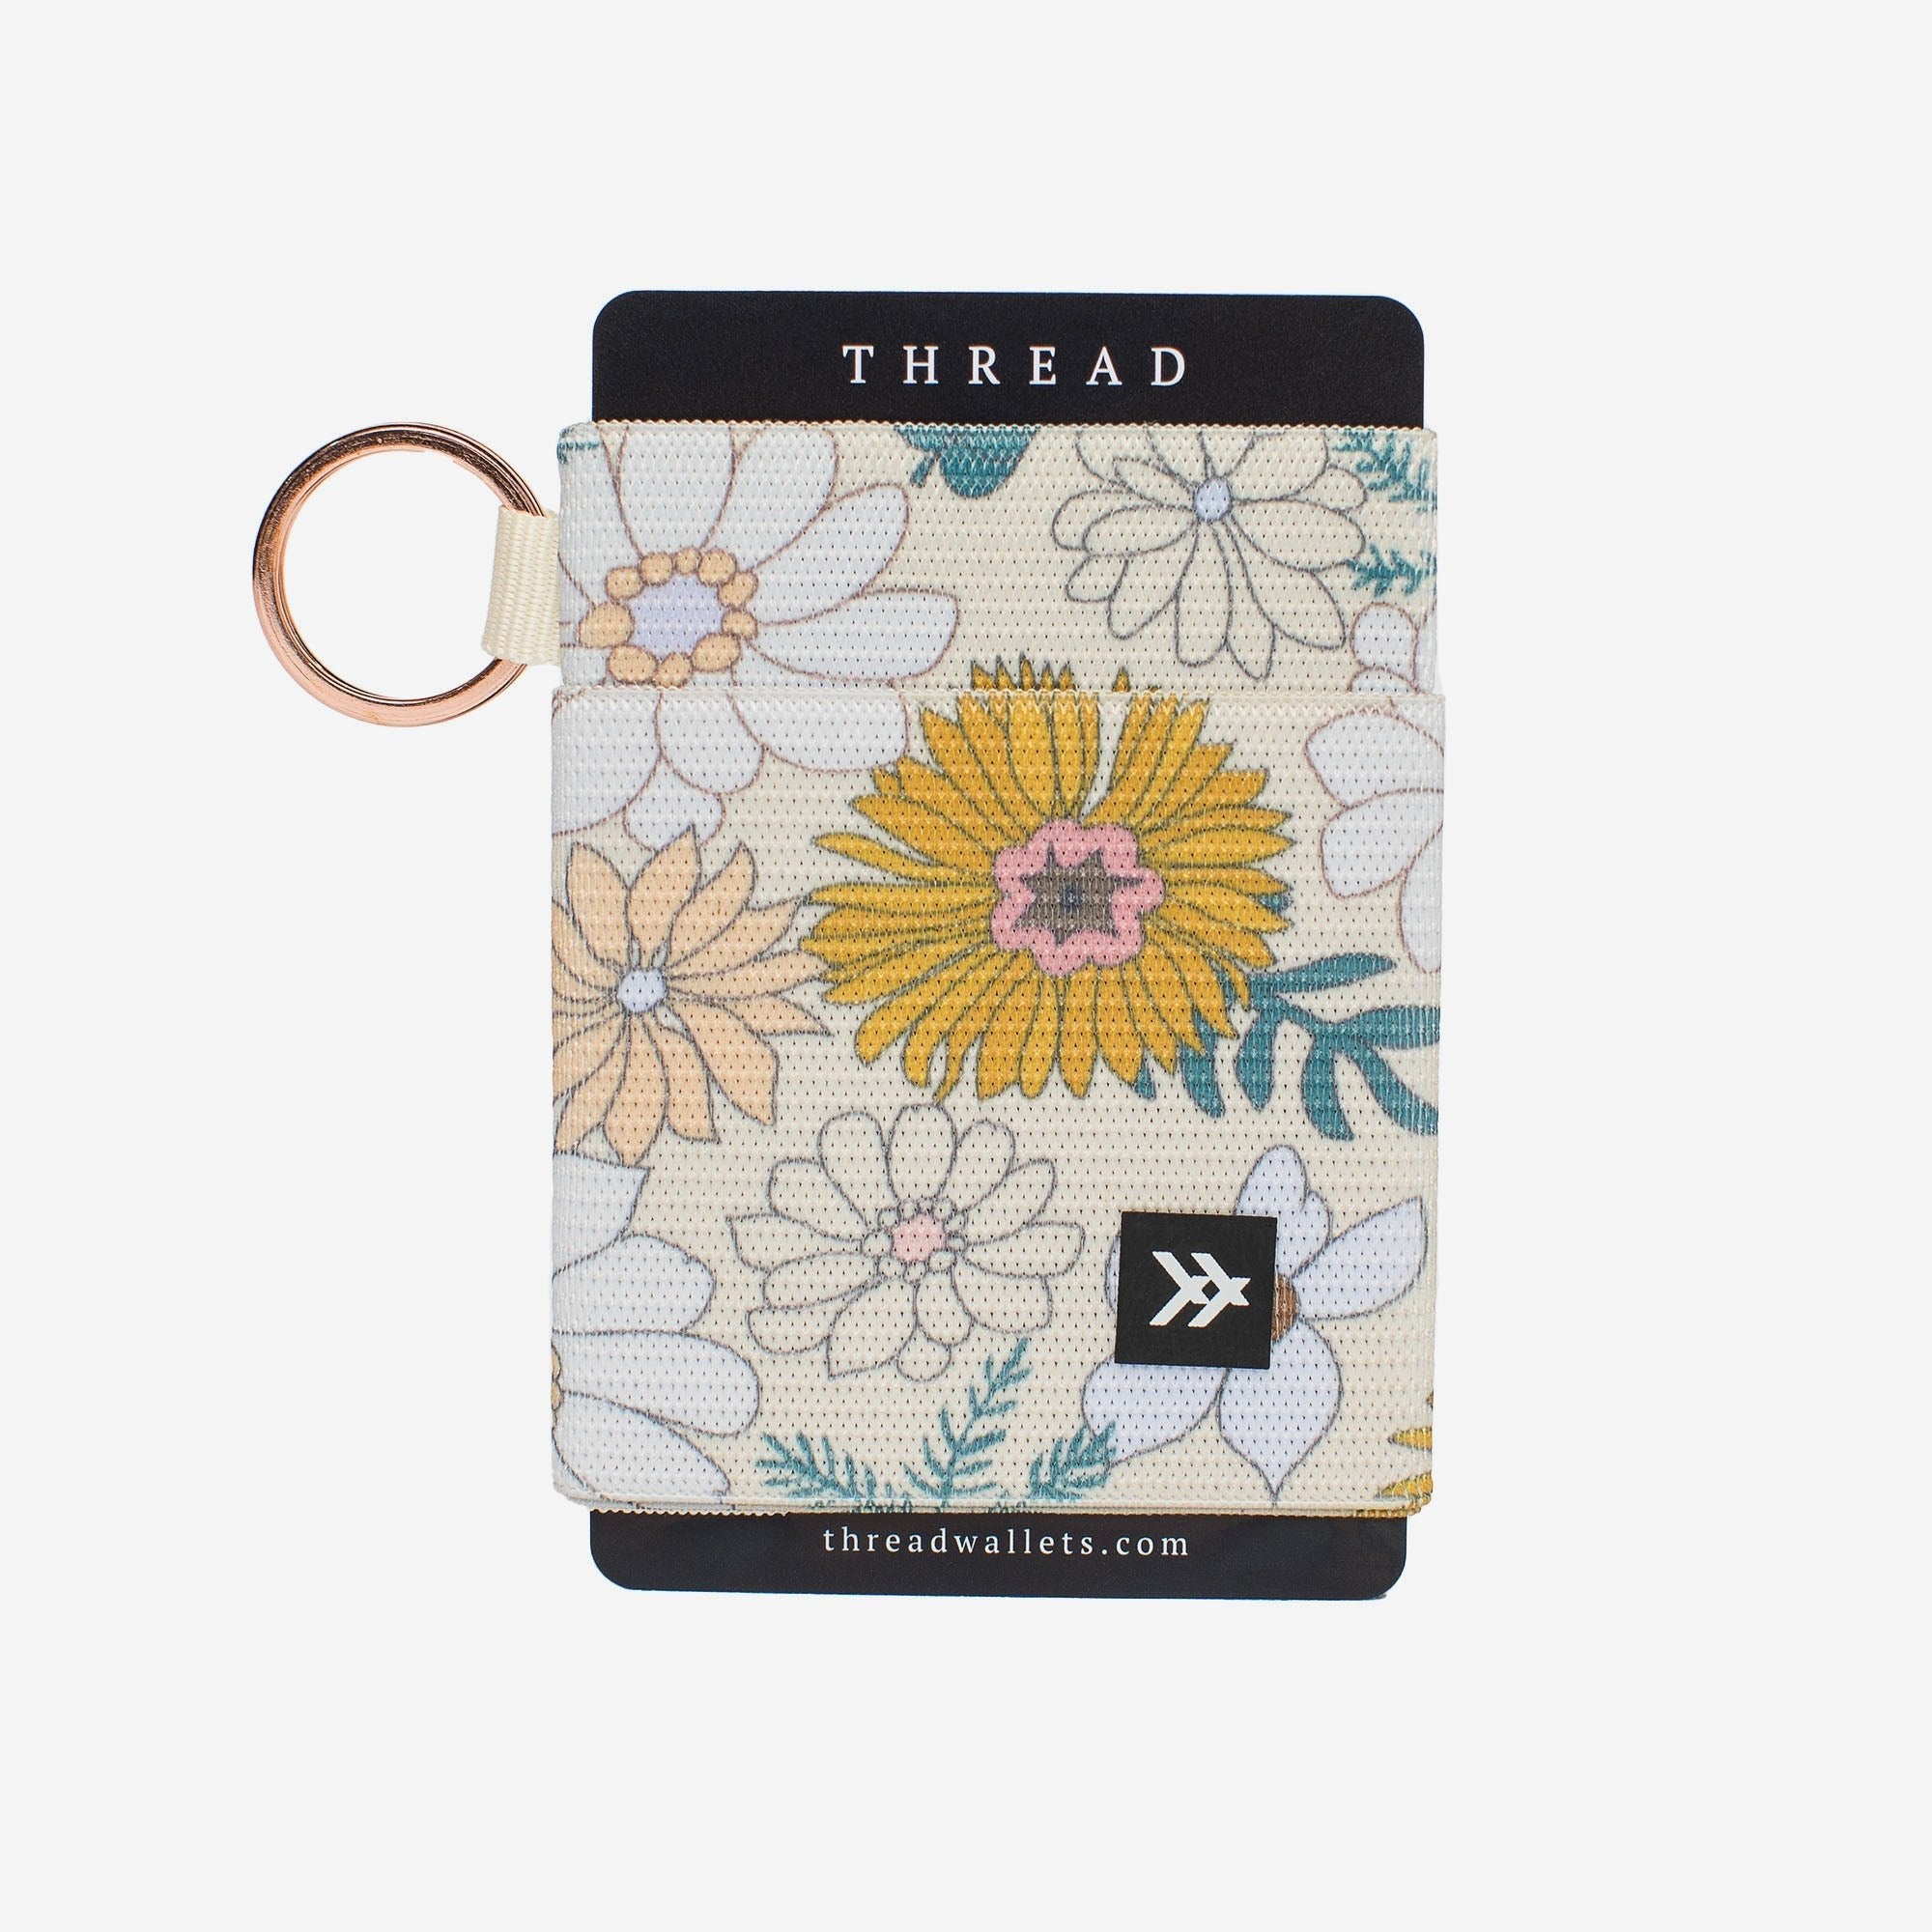 Cream and gold floral elastic wallet